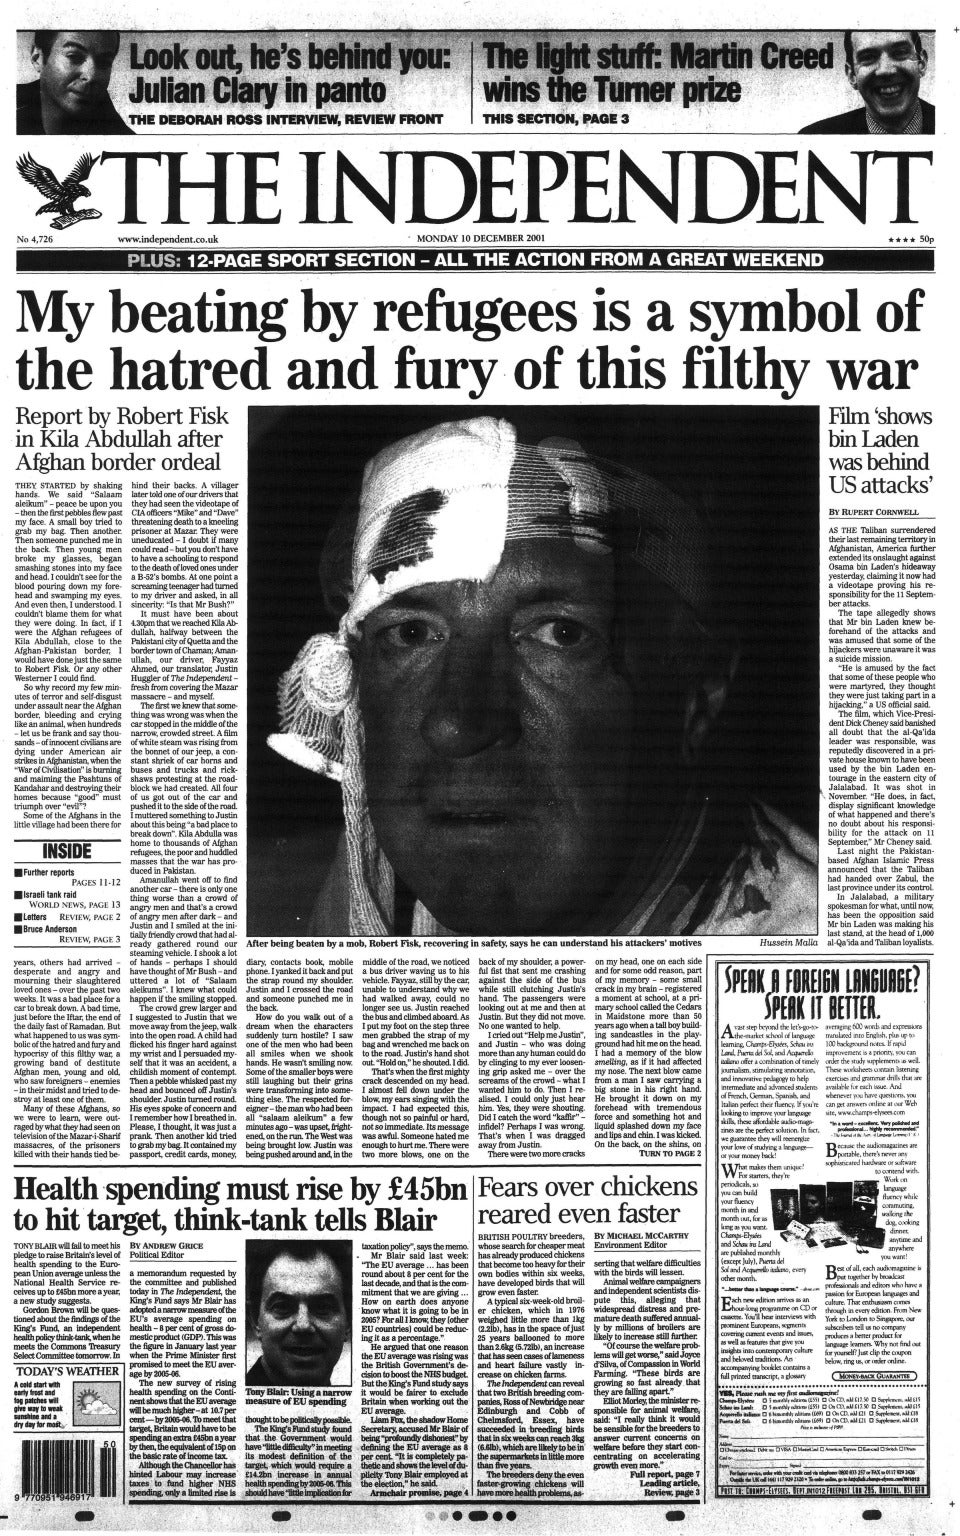 The Independent’s front page of 10 December 2001 in full